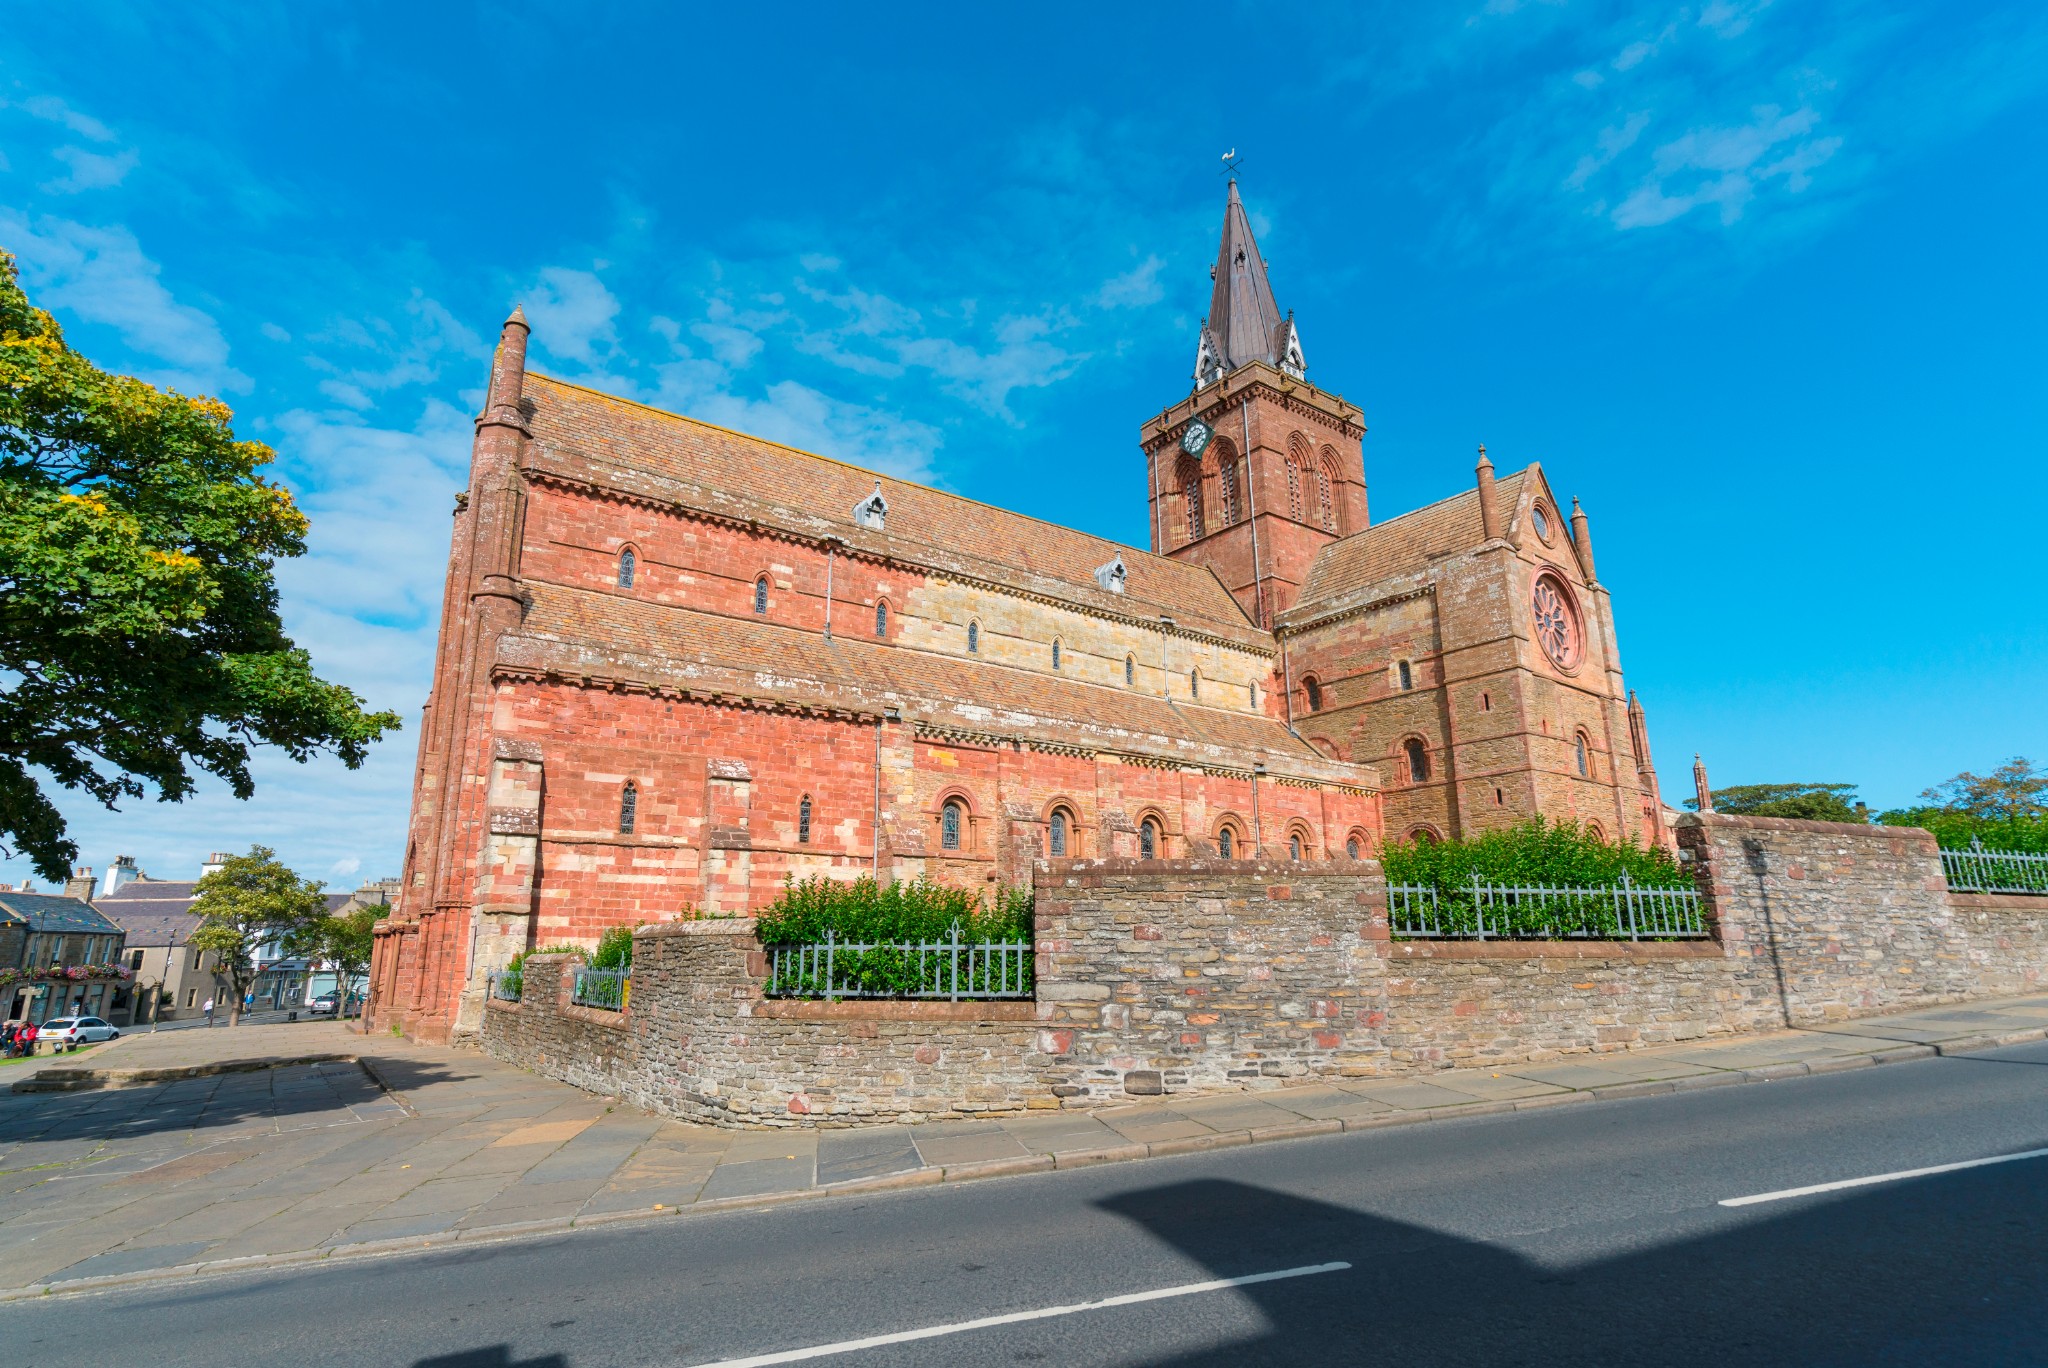 St Magnus Cathedral, Orkney - image by VisitScotland/Kenny Lam